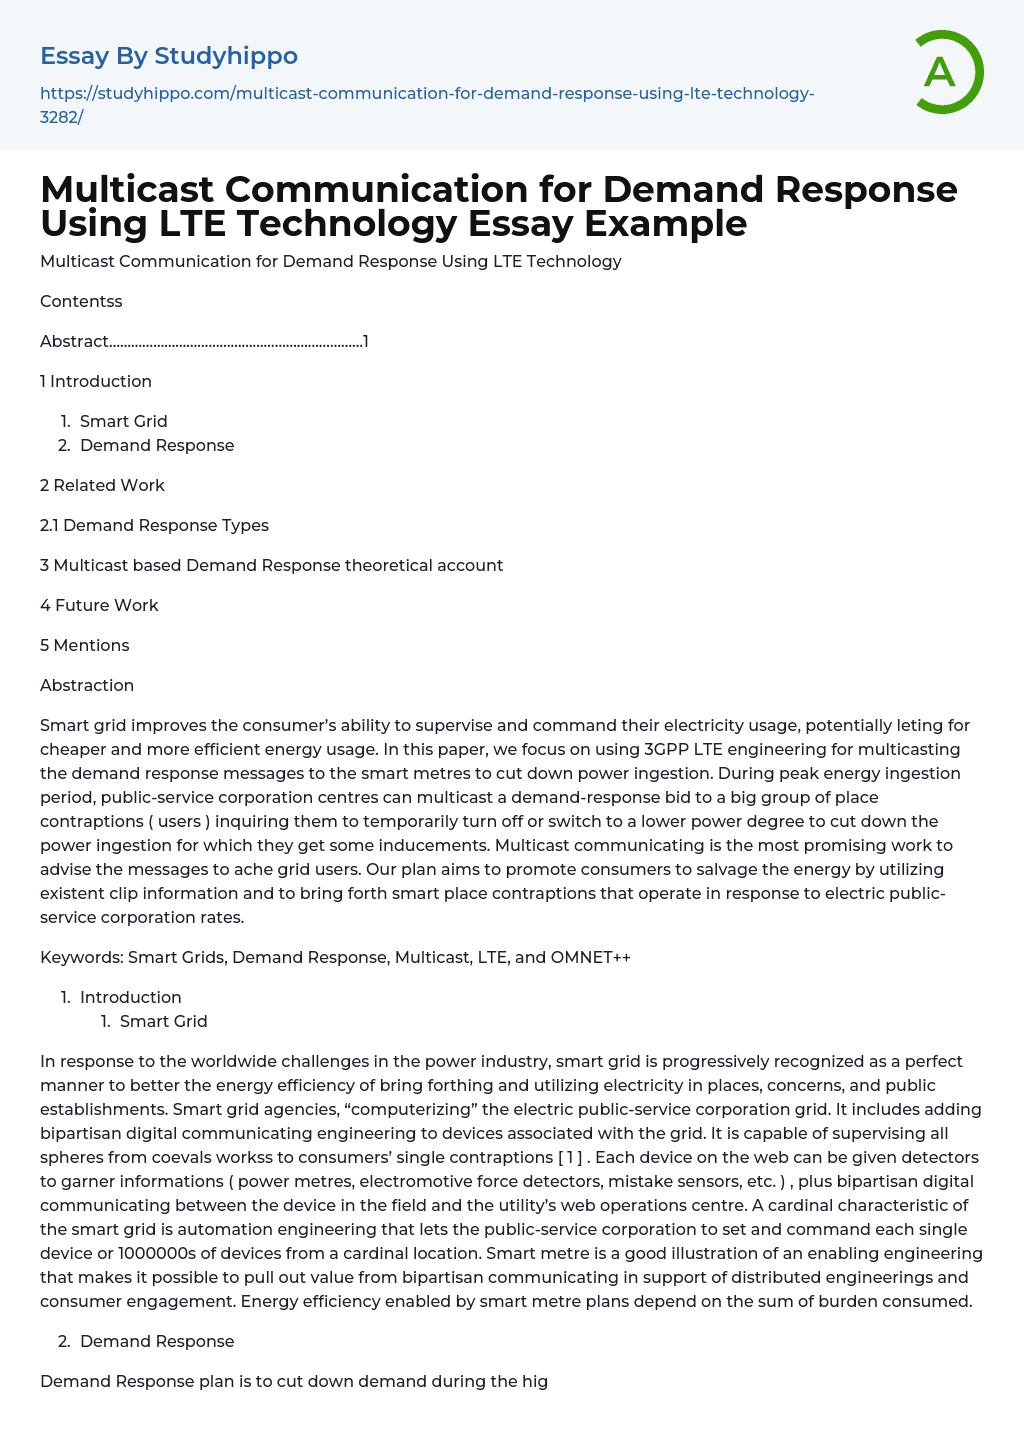 Multicast Communication for Demand Response Using LTE Technology Essay Example